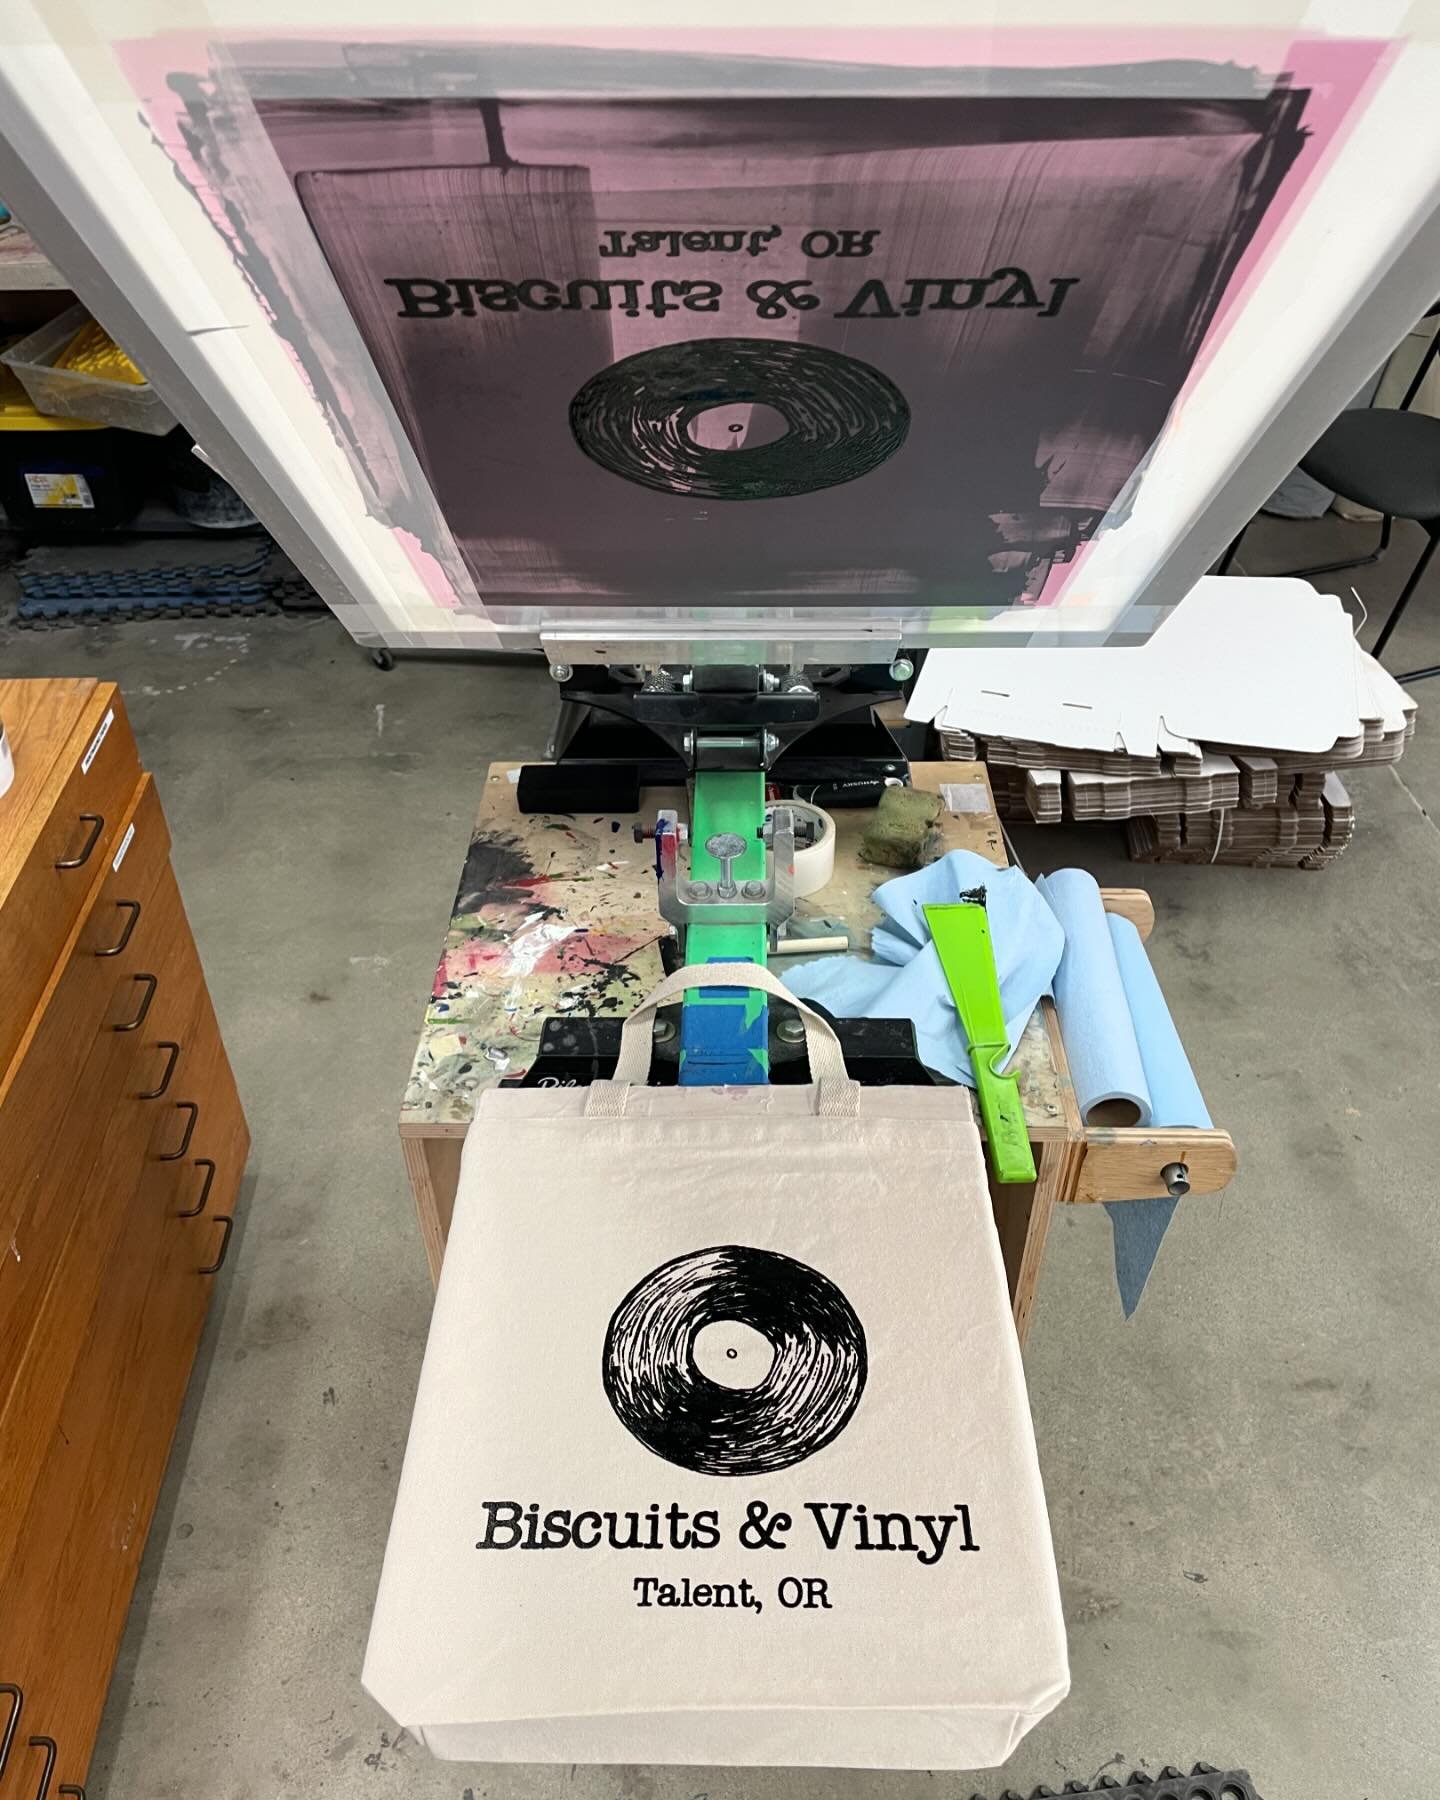 Printed up a fresh batch of totes this morning over at our neighbors @talentmakercity 

These will be available for purchase at the shop this week. Also planning to do a $2 record/$20 tote sale on Saturday May 11 (weather permitting) so save the date